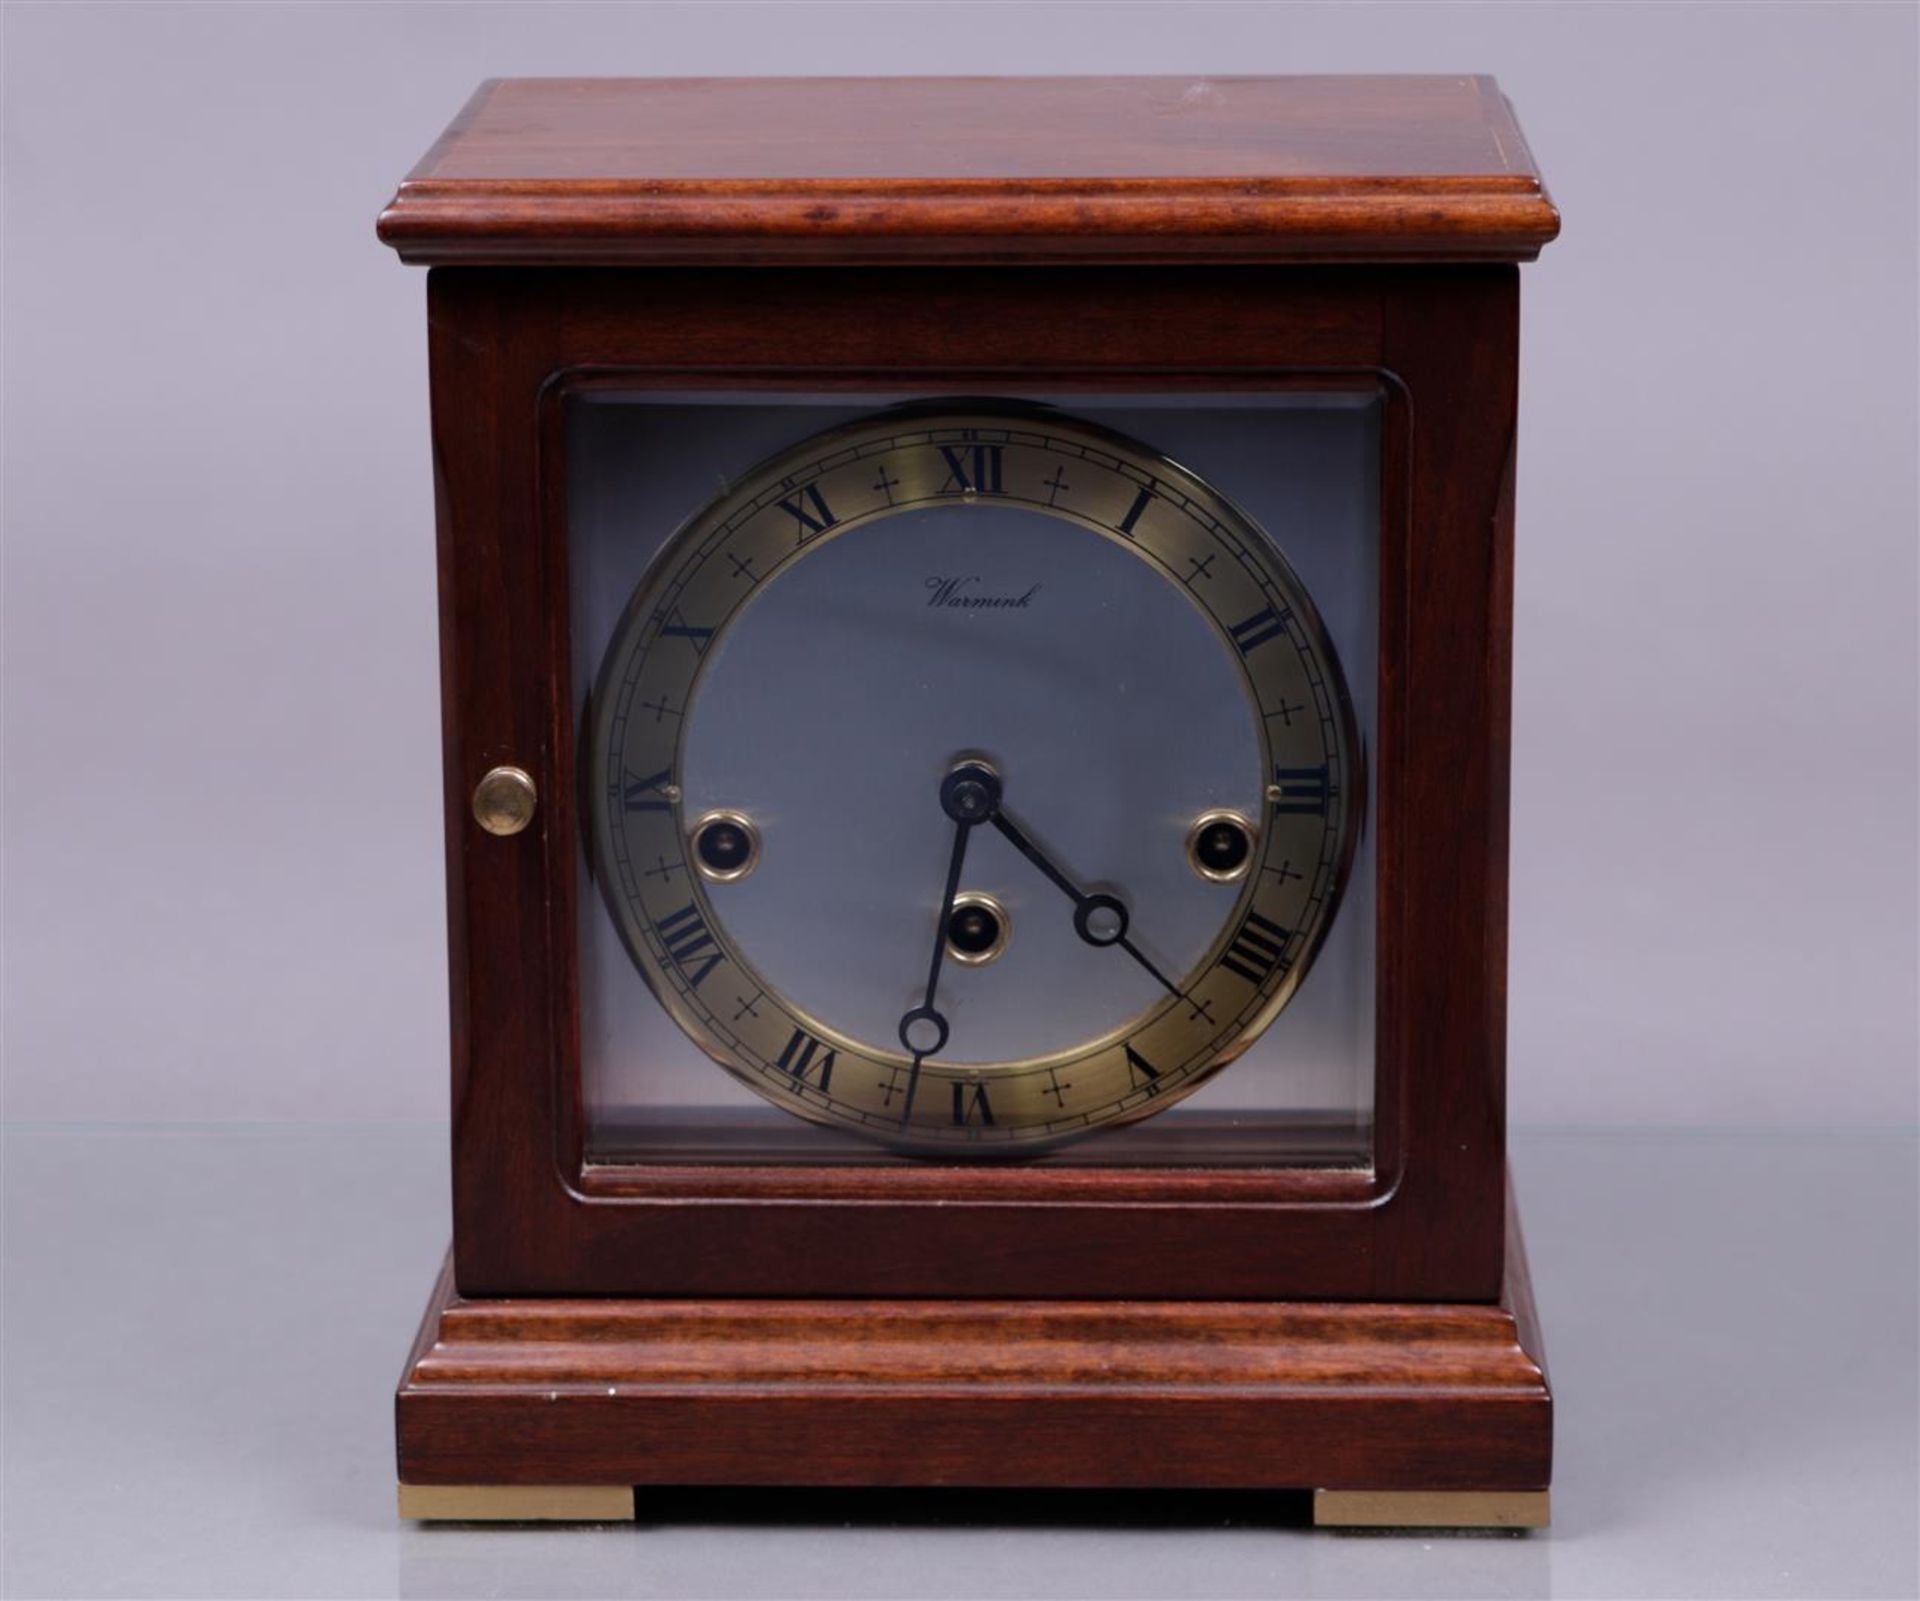 A Warmink table clock with chimes in a mahogany case. 20th century.
22,5 x 18 x 15 cm.